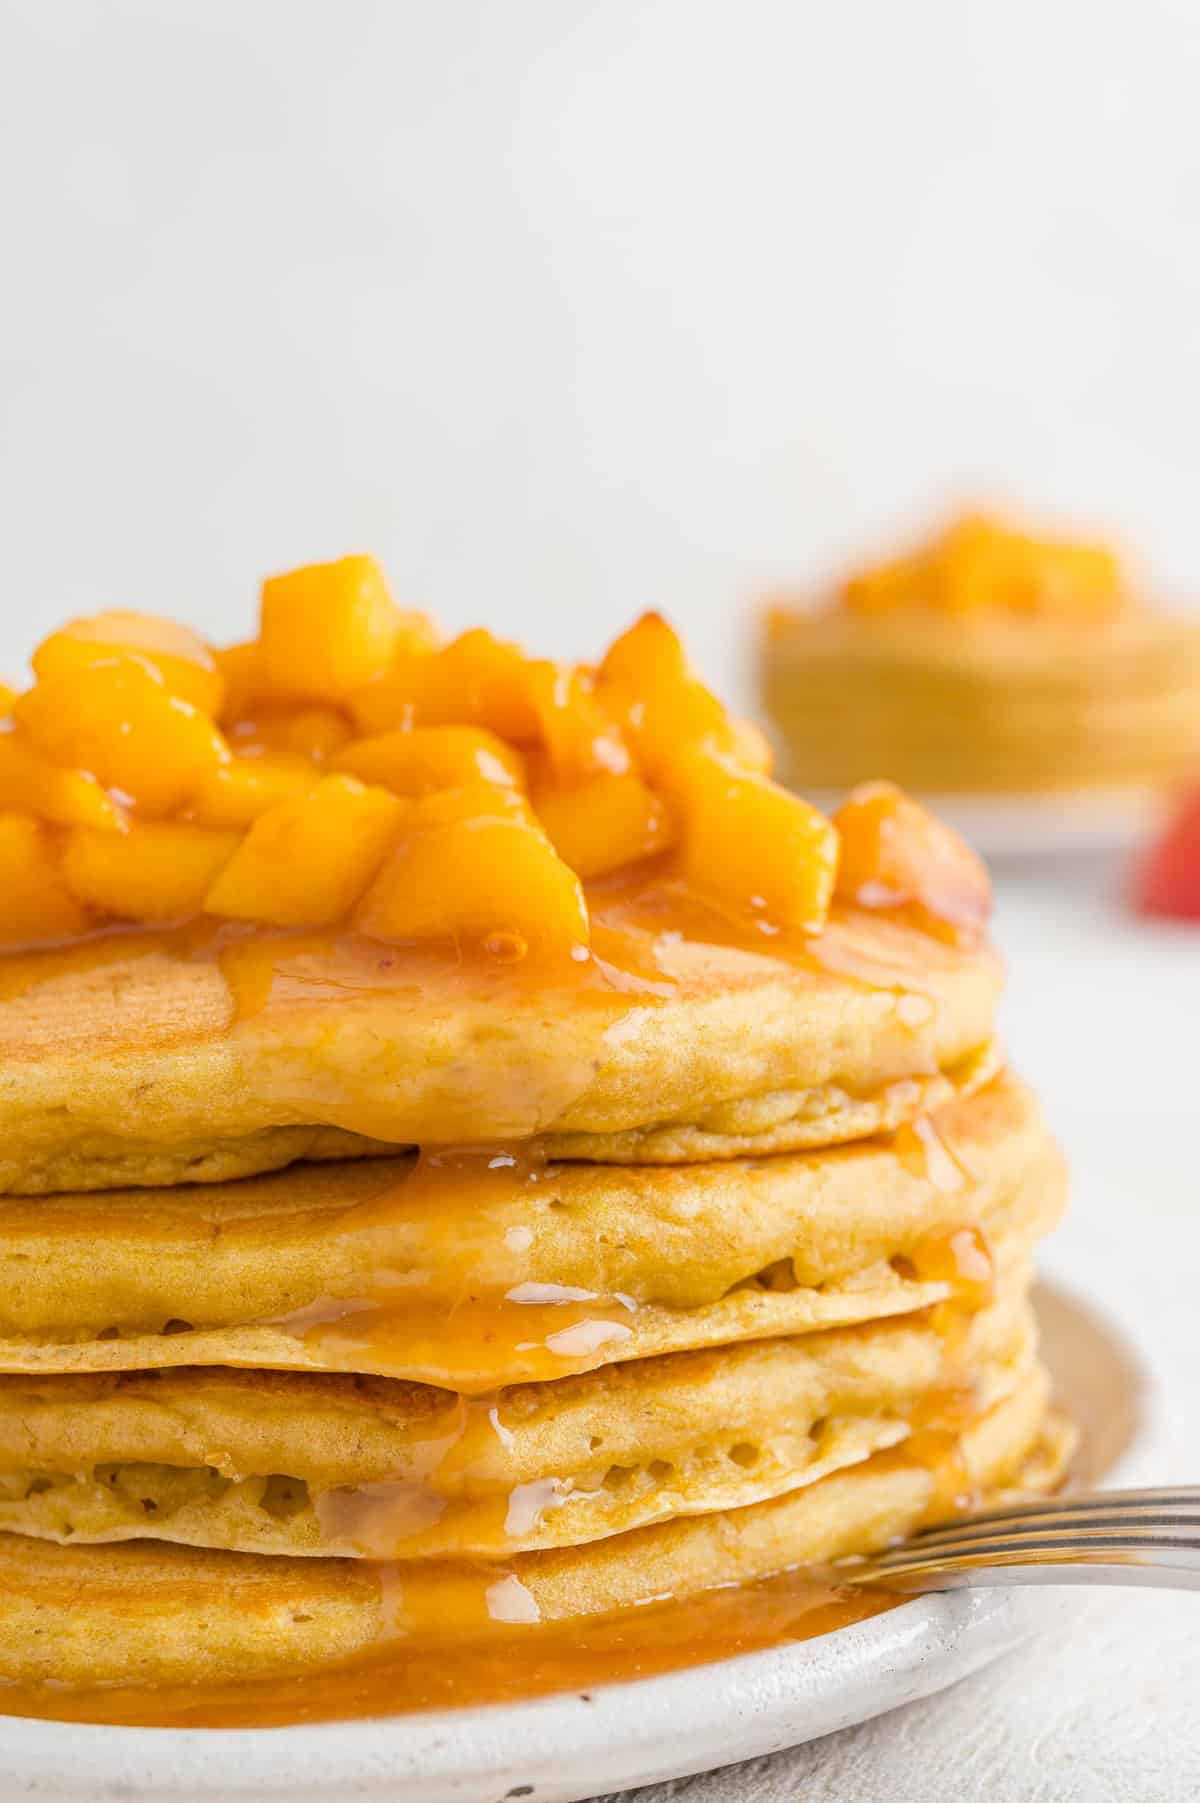 Peach sauce on a tall stack of pancakes.